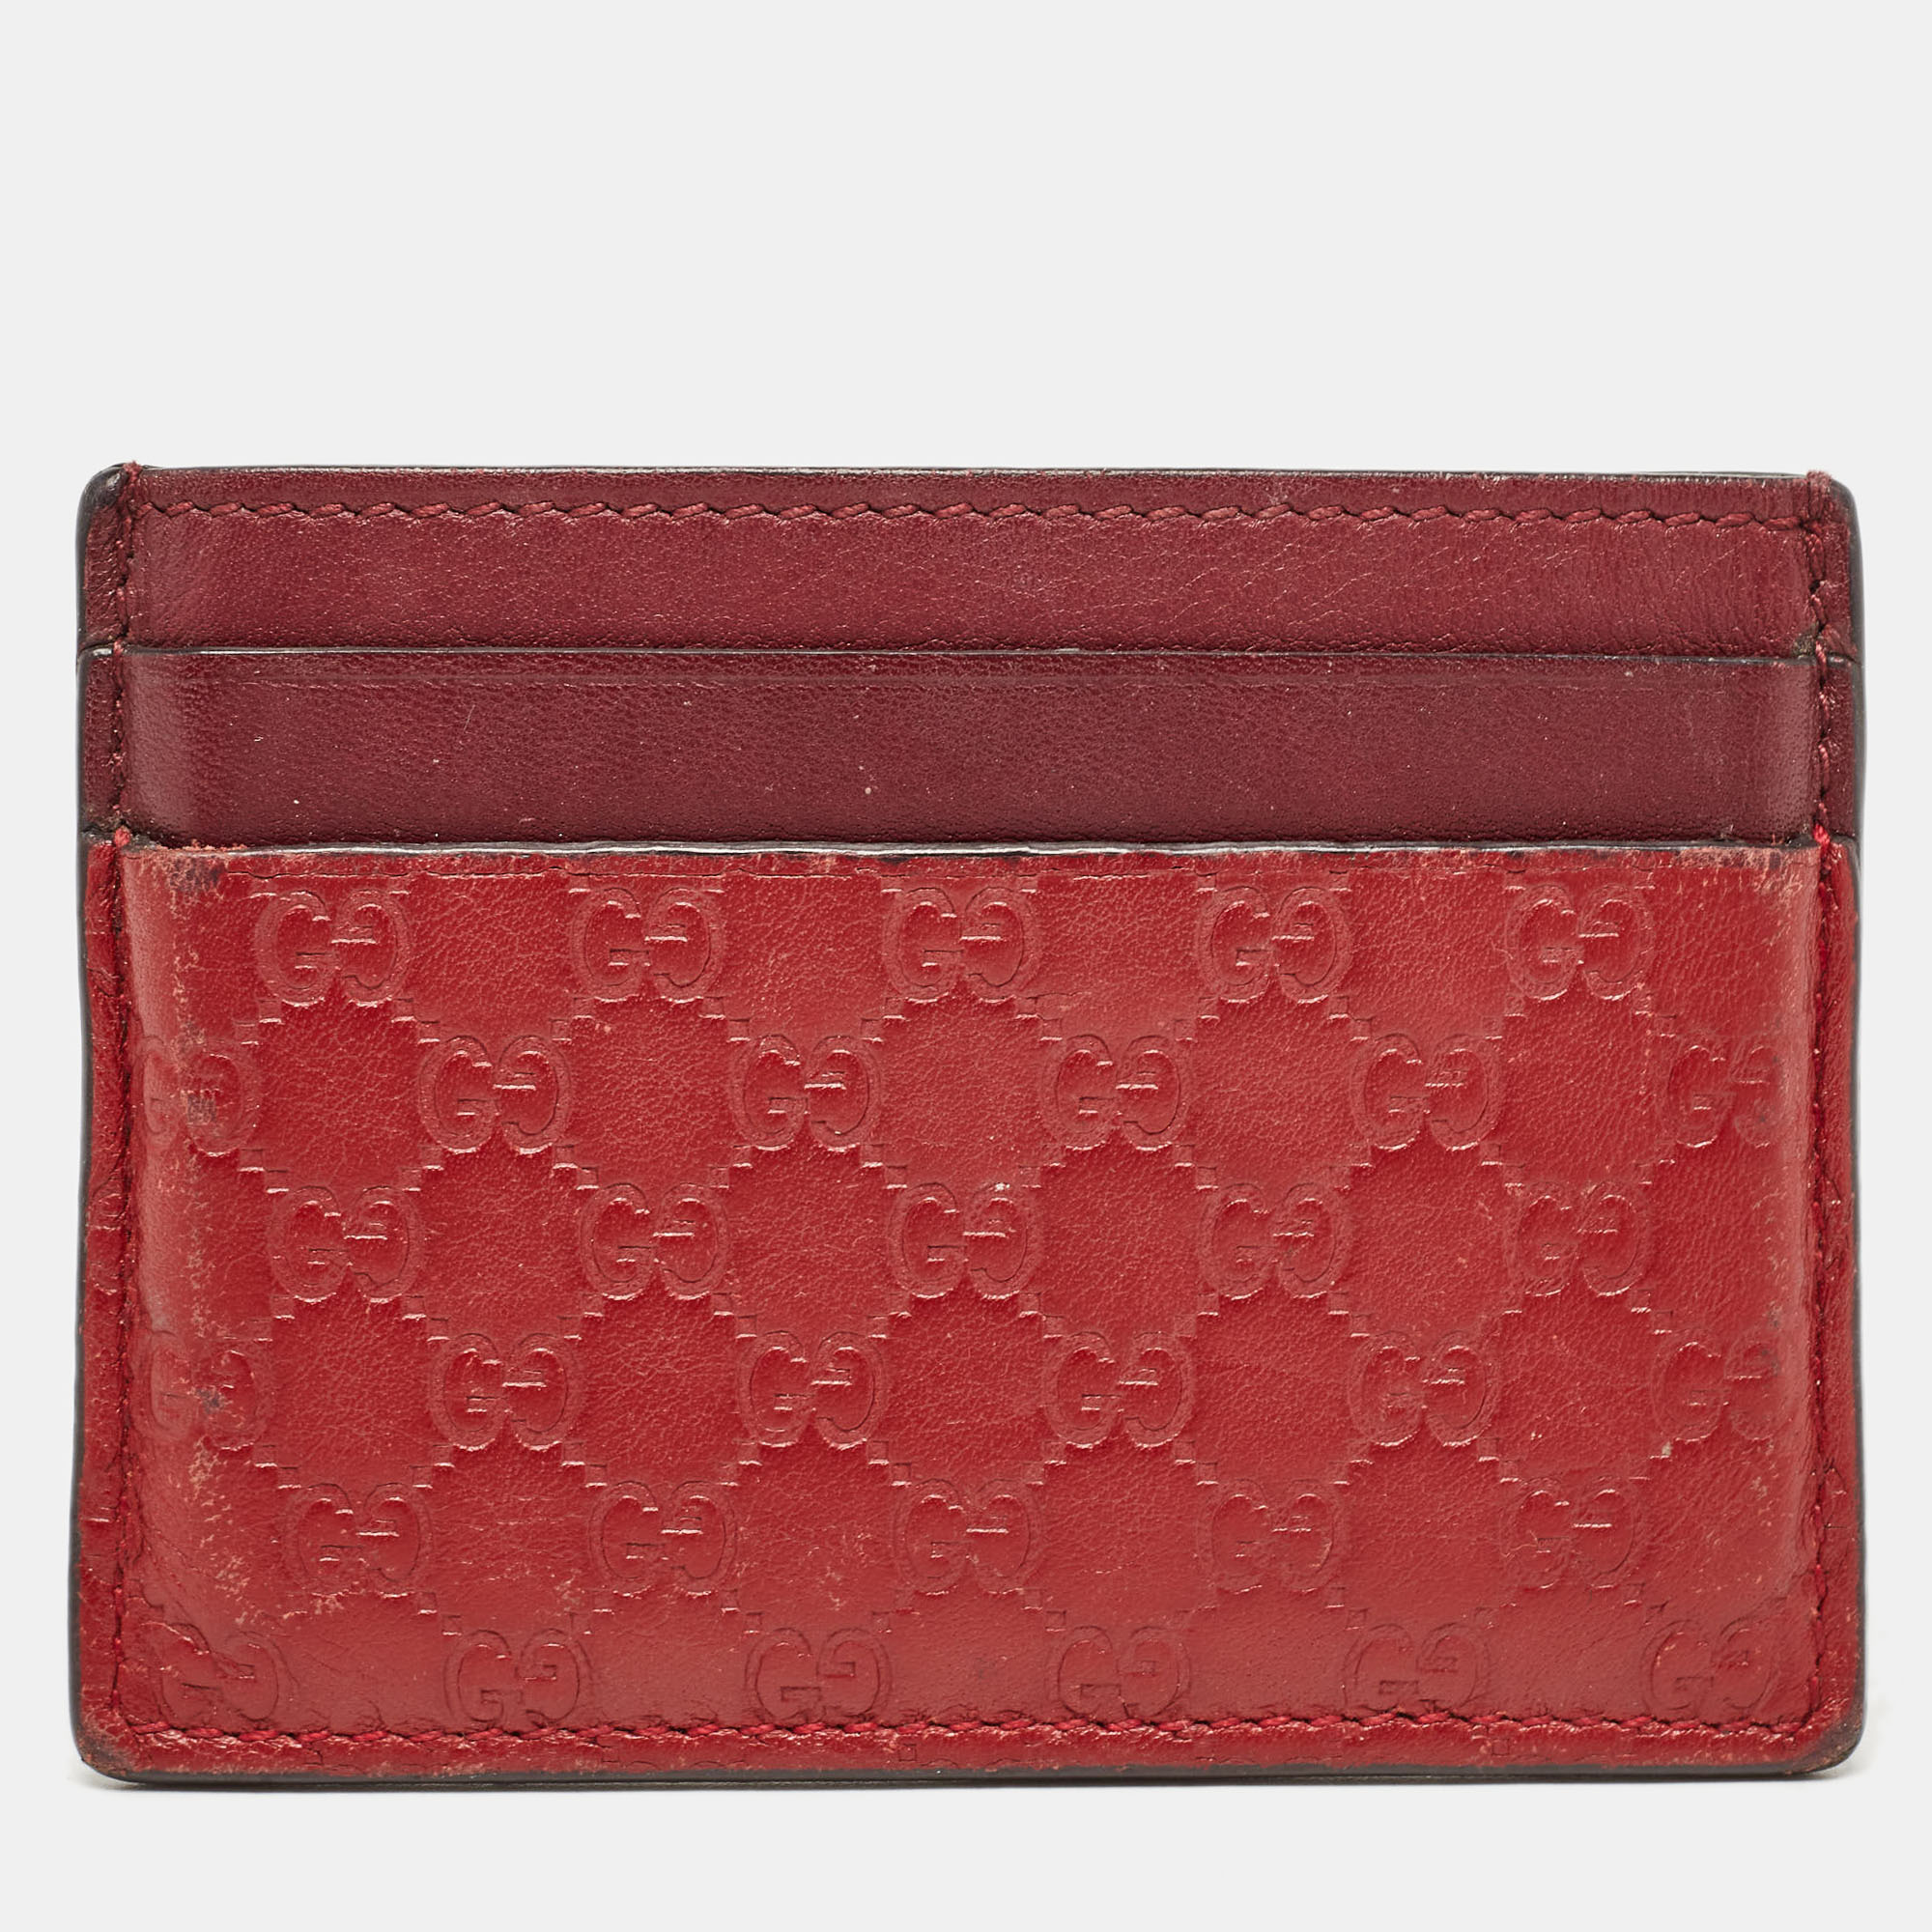 Gucci red/burgundy microguccissima leather card holder